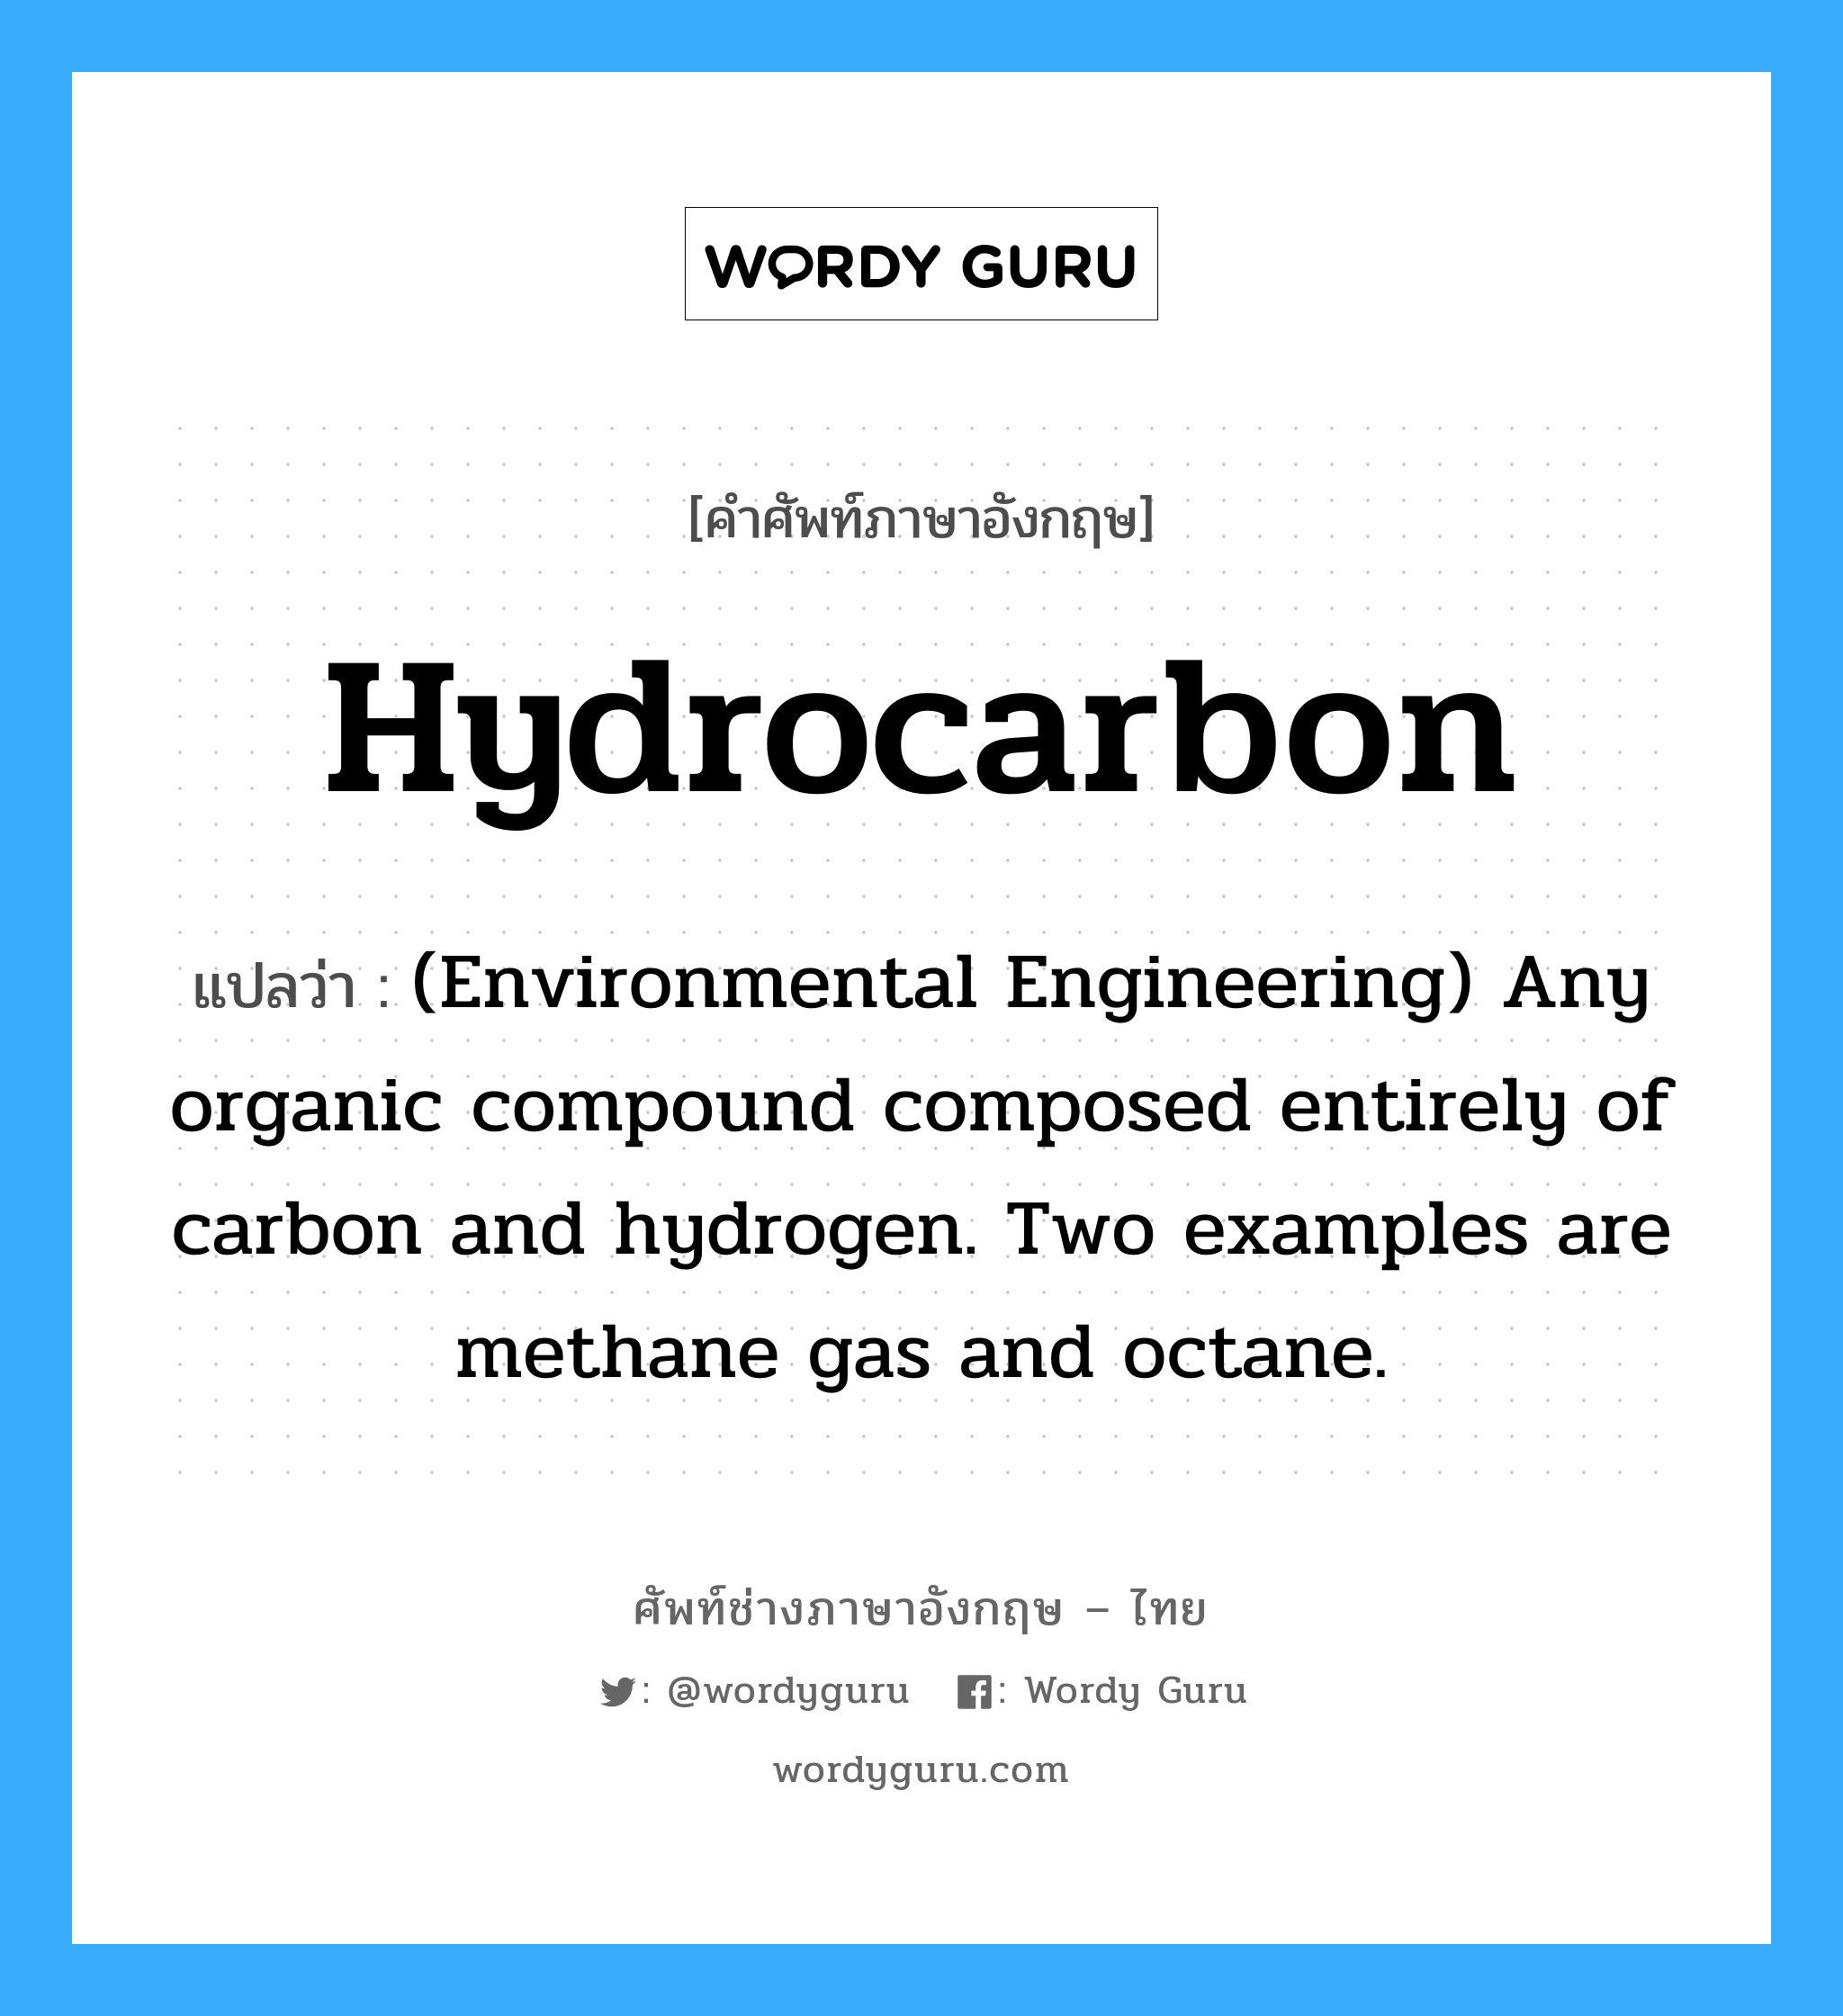 (Environmental Engineering) Any organic compound composed entirely of carbon and hydrogen. Two examples are methane gas and octane. ภาษาอังกฤษ?, คำศัพท์ช่างภาษาอังกฤษ - ไทย (Environmental Engineering) Any organic compound composed entirely of carbon and hydrogen. Two examples are methane gas and octane. คำศัพท์ภาษาอังกฤษ (Environmental Engineering) Any organic compound composed entirely of carbon and hydrogen. Two examples are methane gas and octane. แปลว่า Hydrocarbon